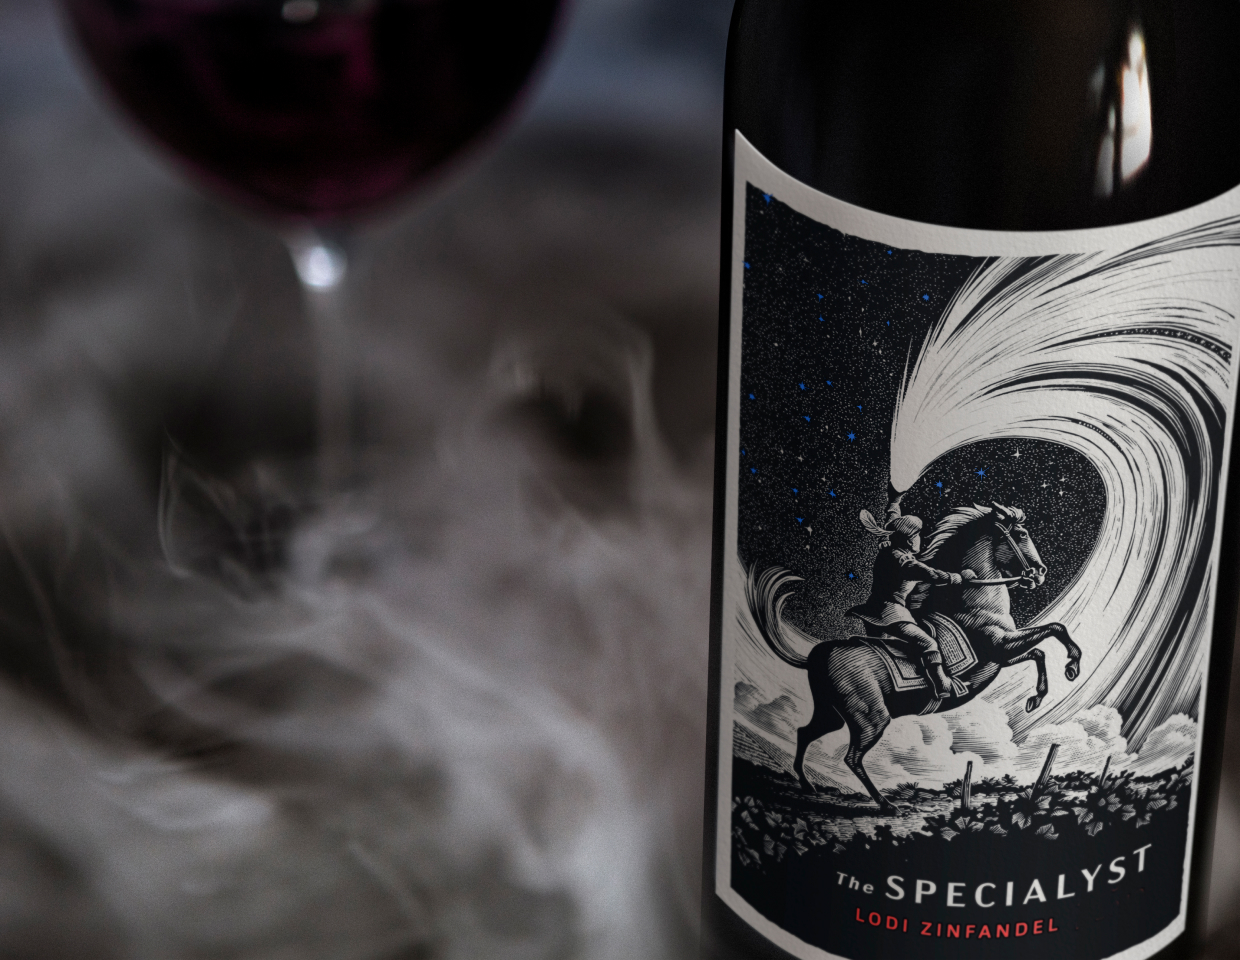 Close up of a bottle of The Specialyst Lodi zinfandel with smoke surrounding it.